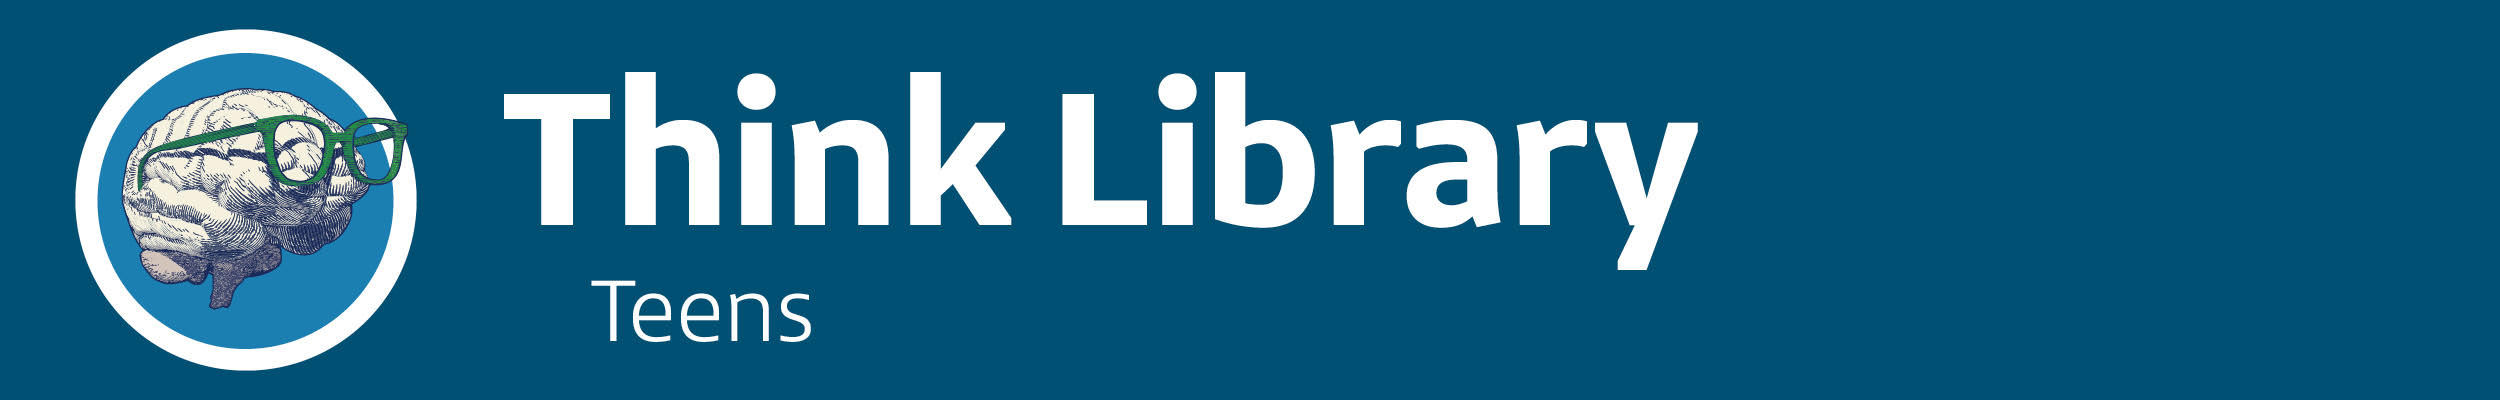 Think Library: For Teens